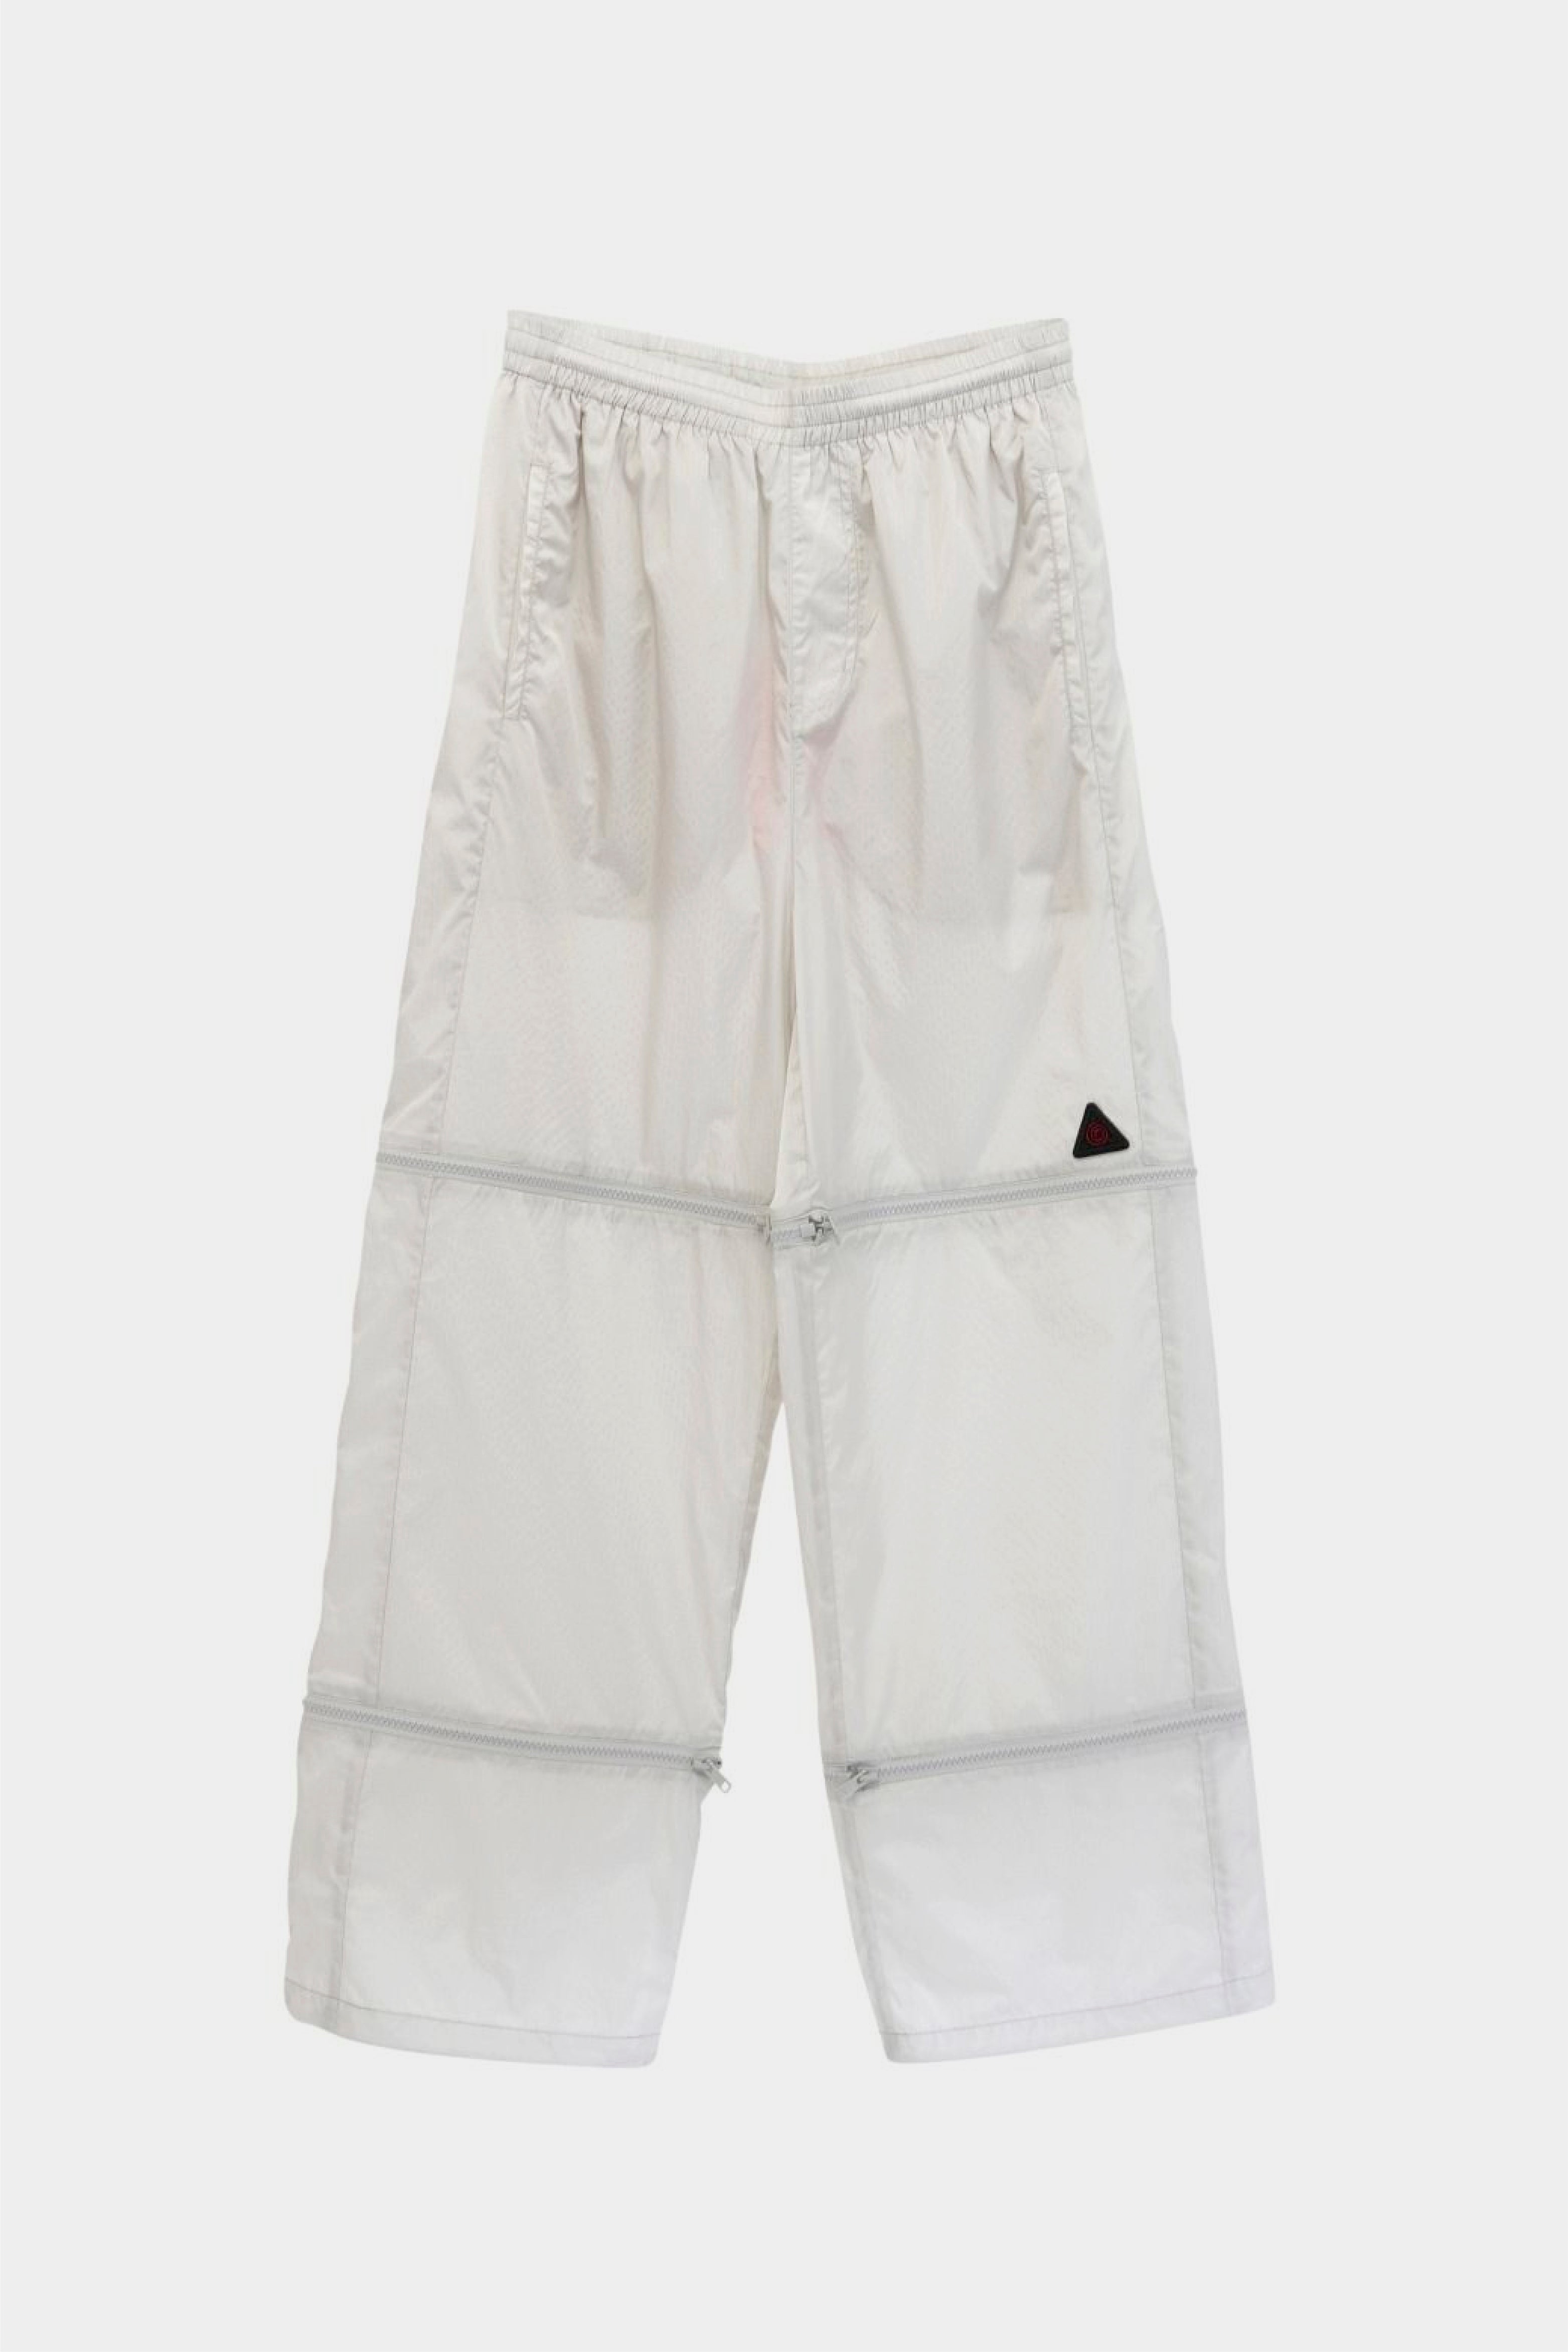 Selectshop FRAME - PERKS AND MINI Lifted Zip Track Pant Bottoms Concept Store Dubai